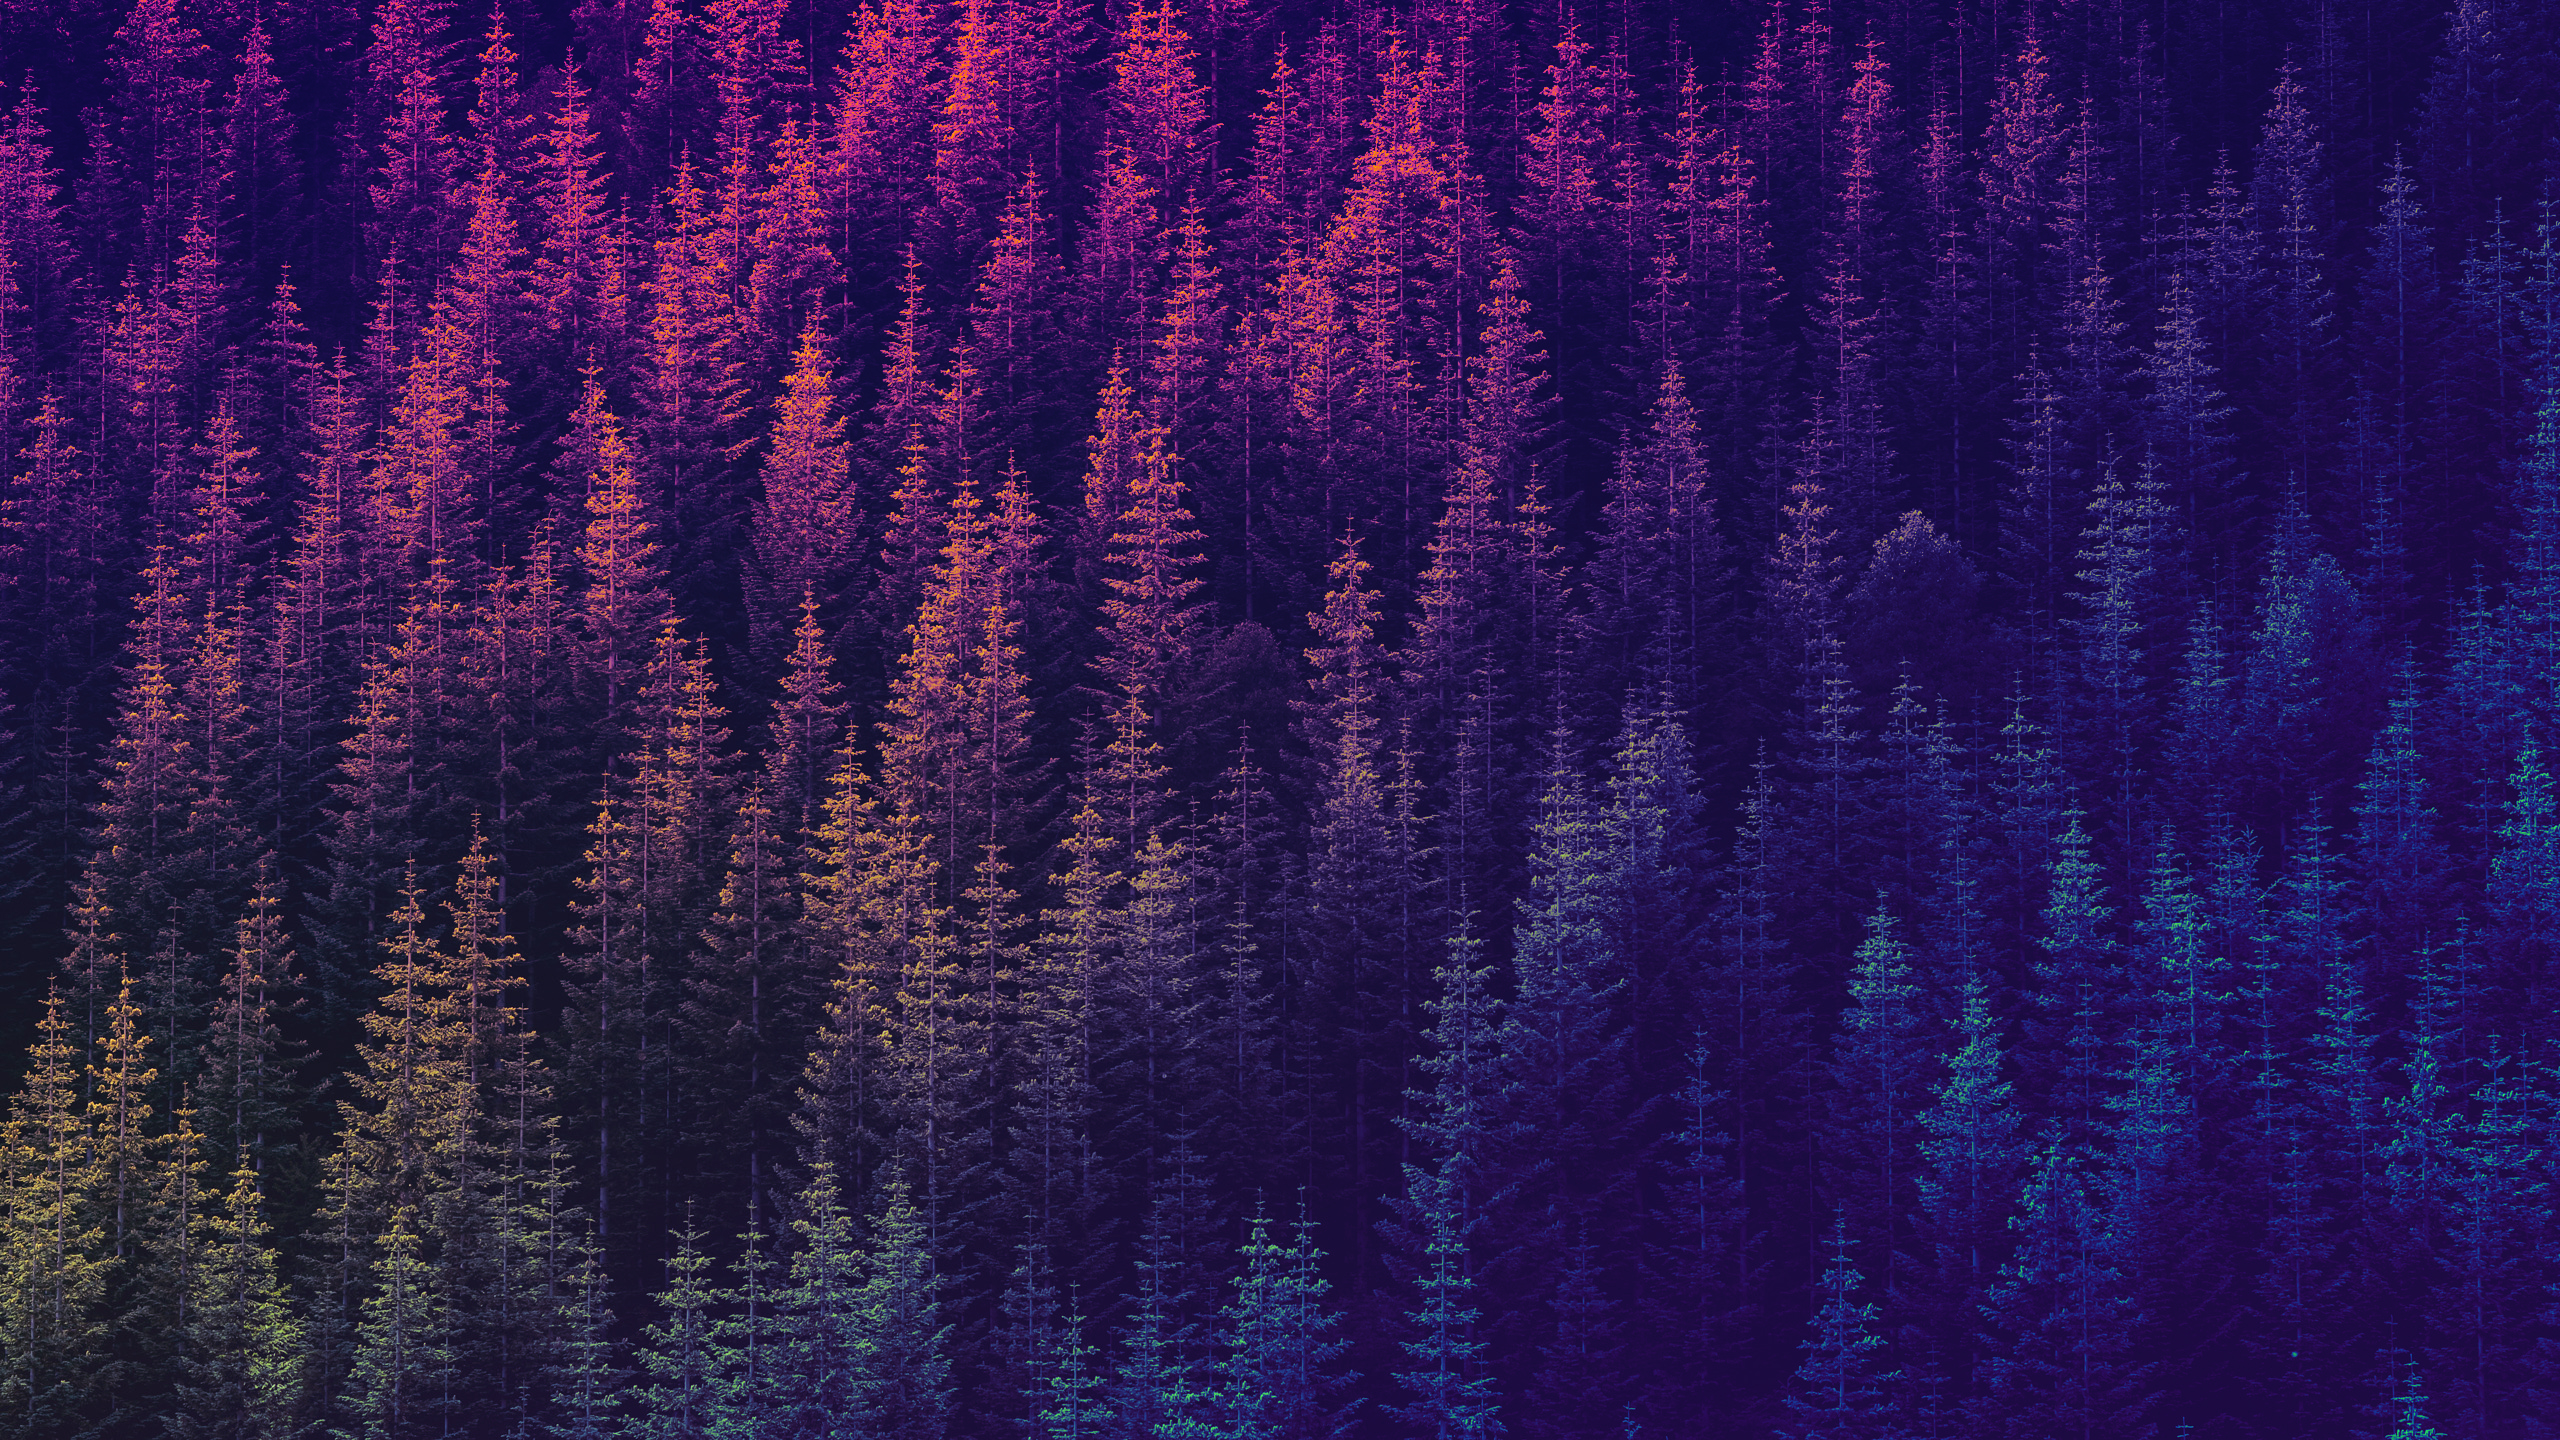 General 2560x1440 psychedelic trippy trees forest